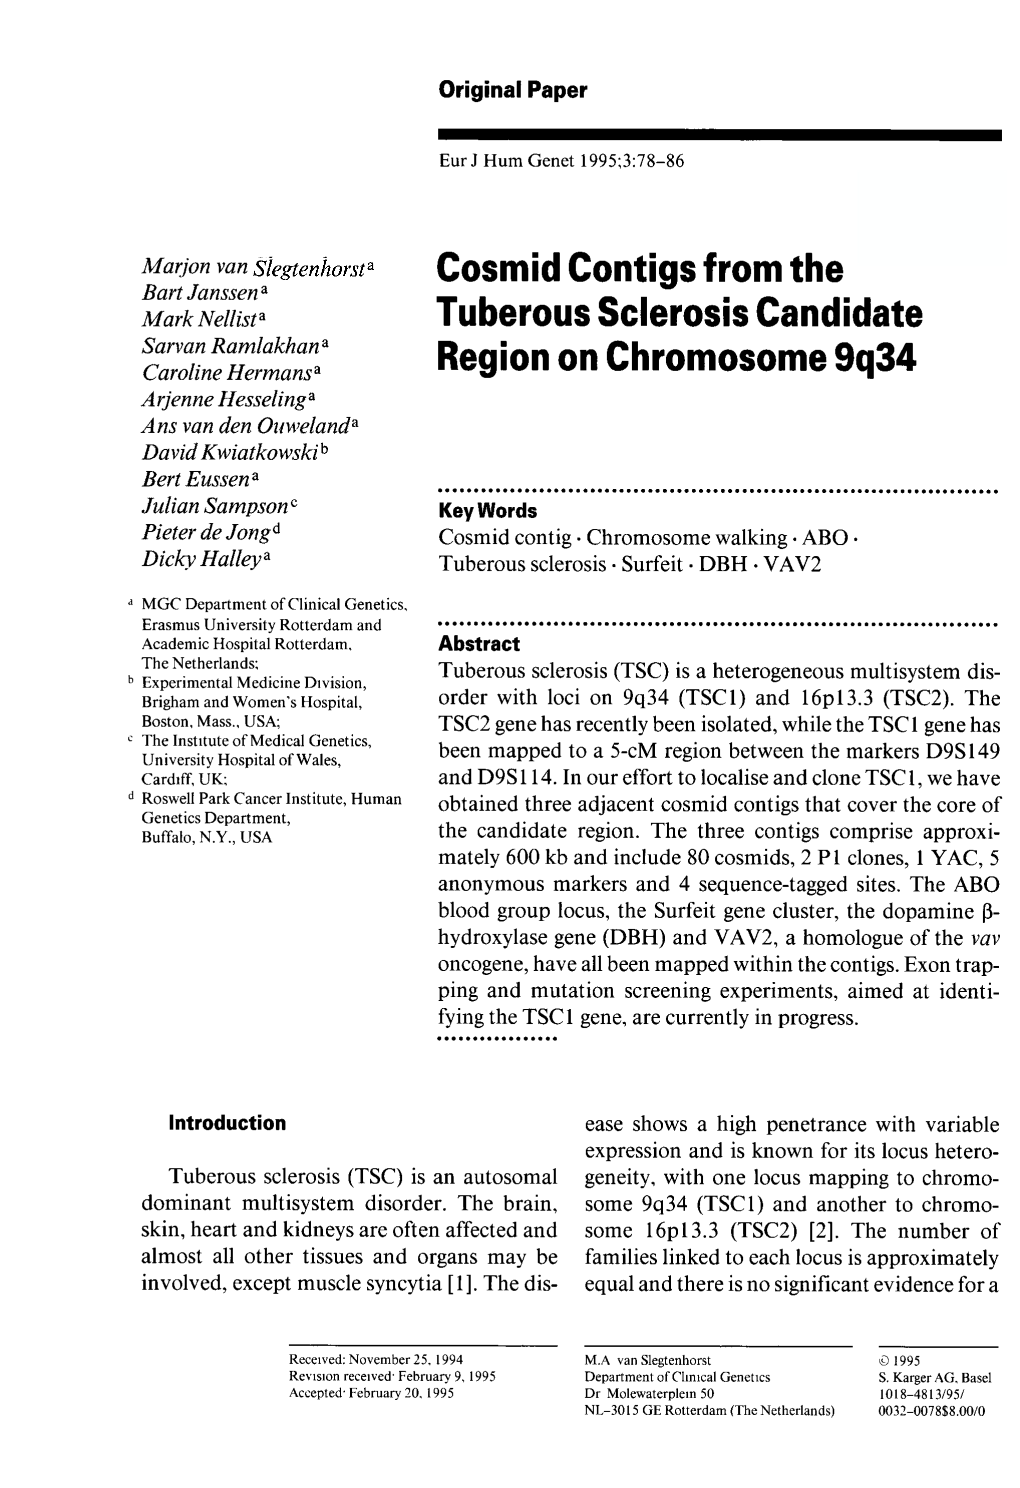 Cosmid Contigs from the Tuberous Sclerosis Candidate Region On